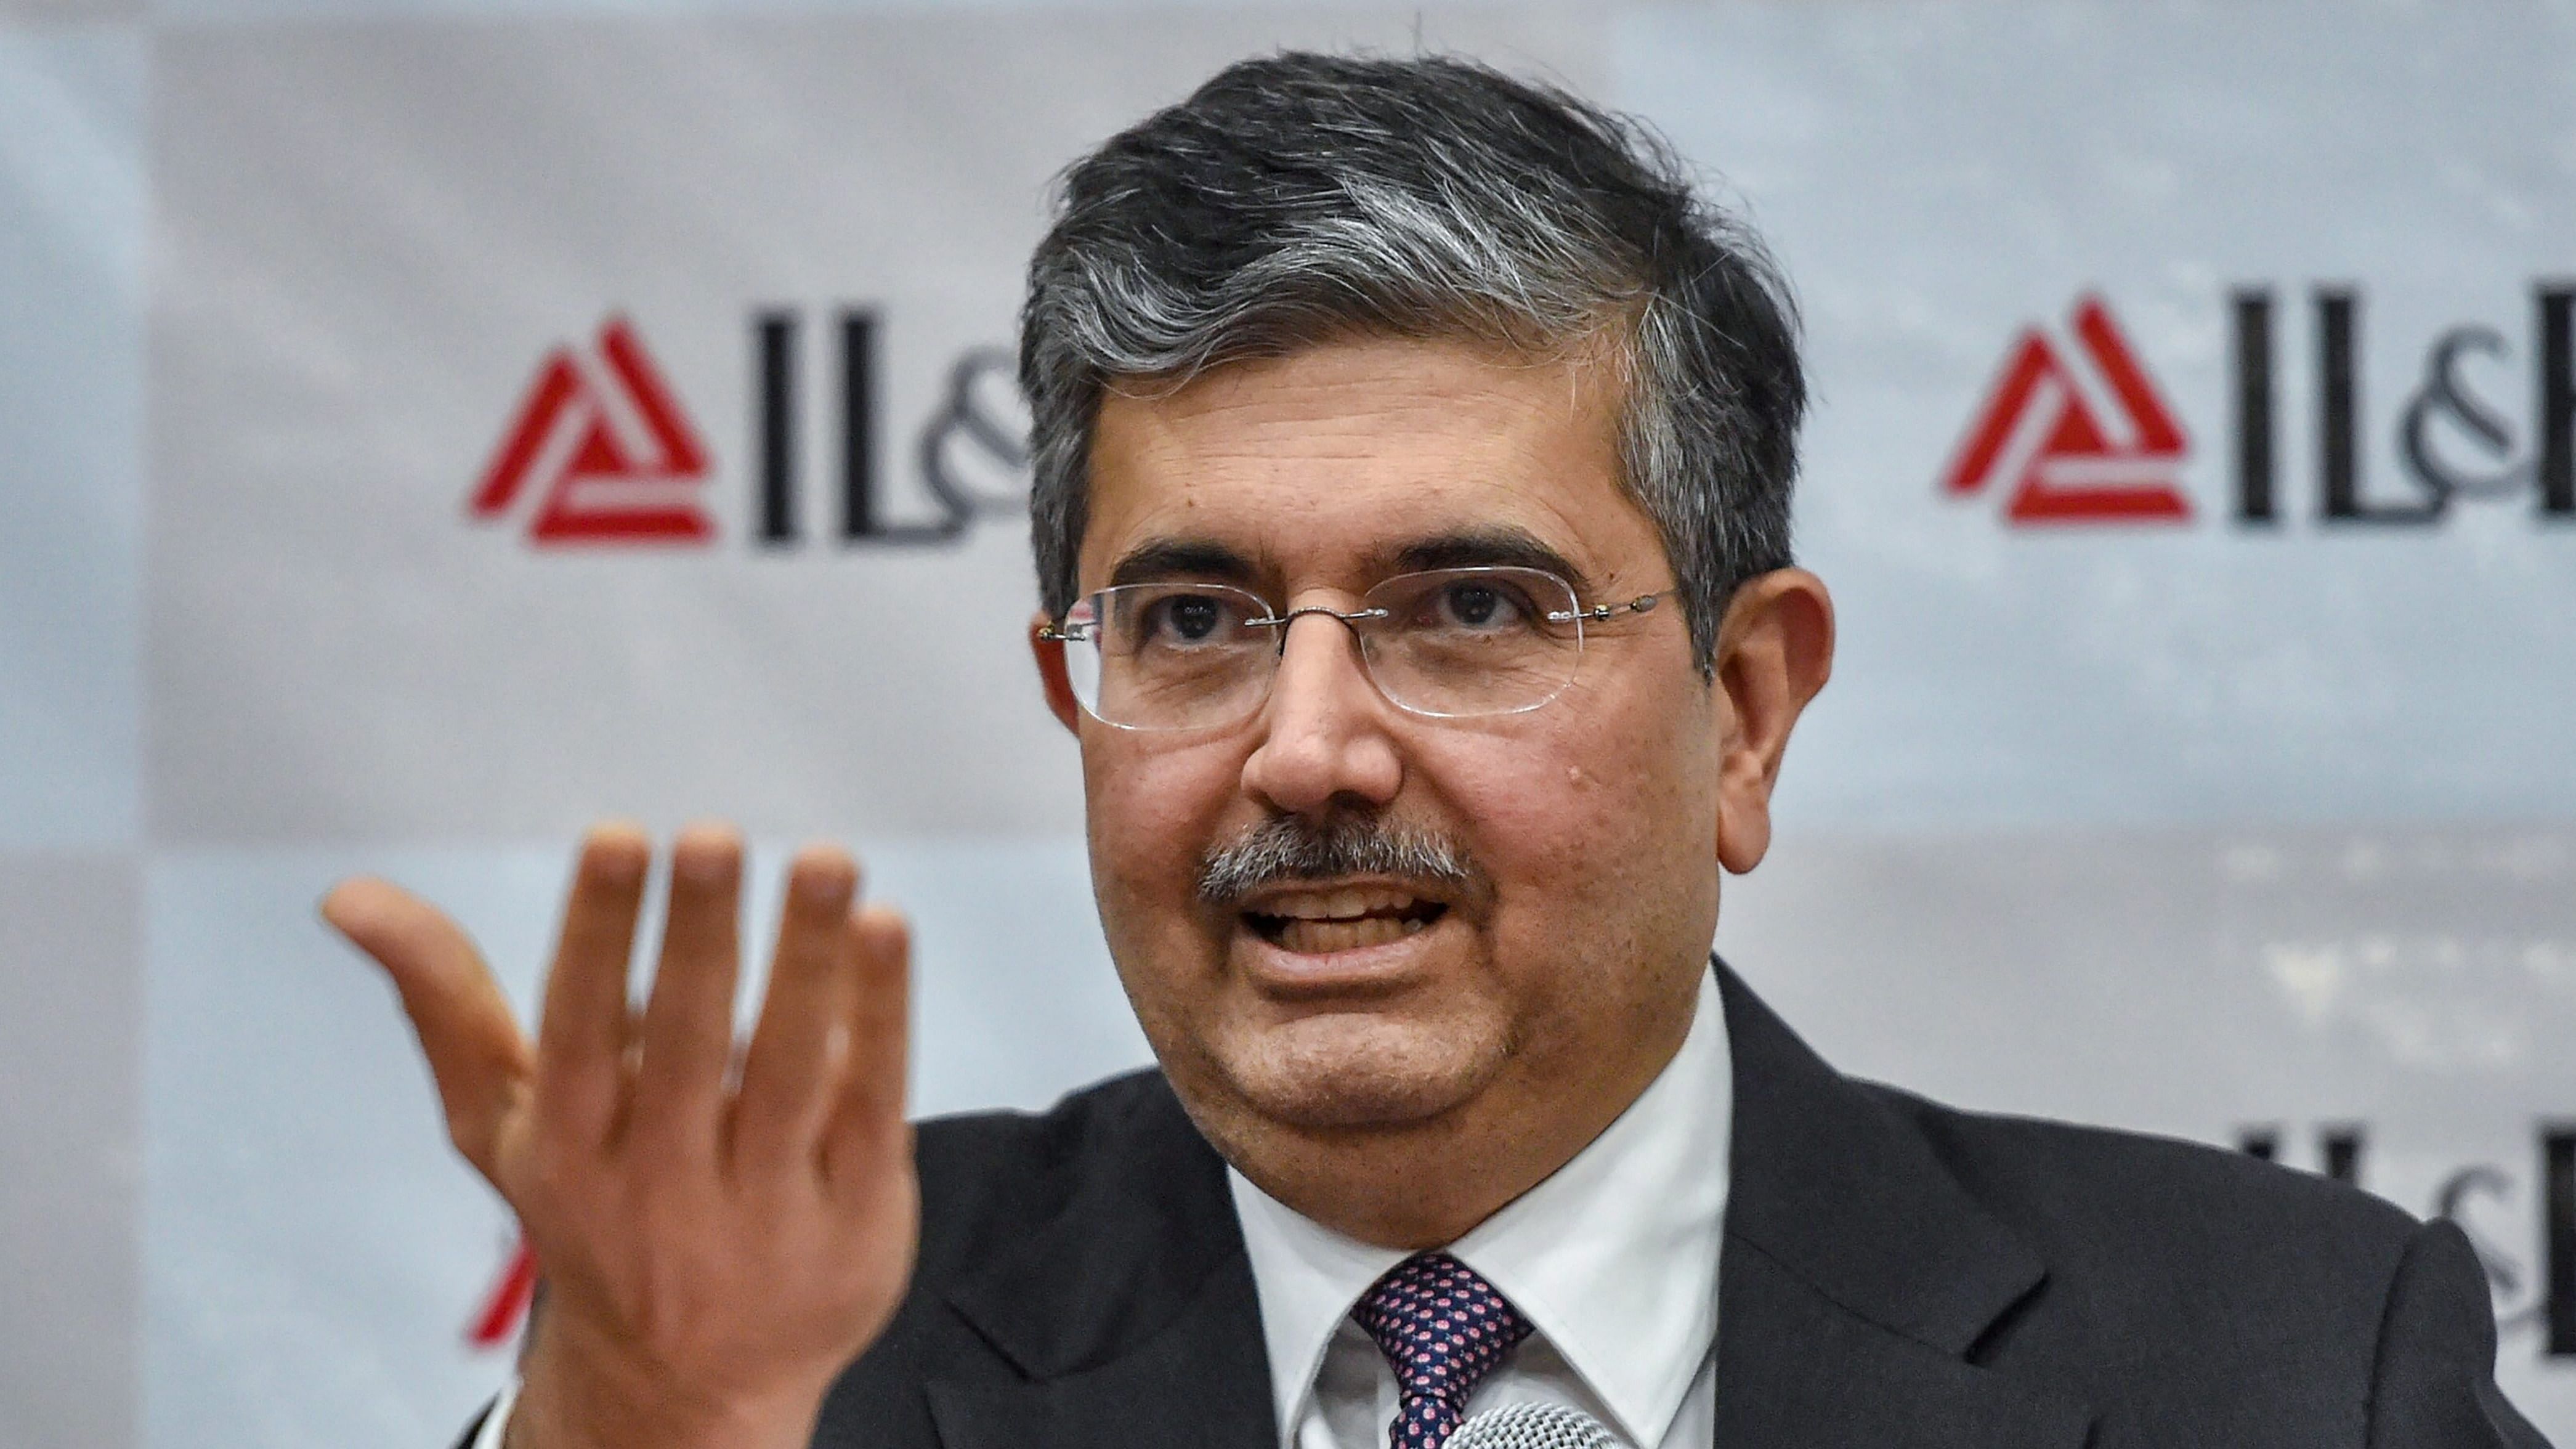 Uday Kotak founded Mumbai-based Kotak Mahindra Bank, provides commercial and investment banking, as well as insurance and brokerage services. Credit: PTI Photo